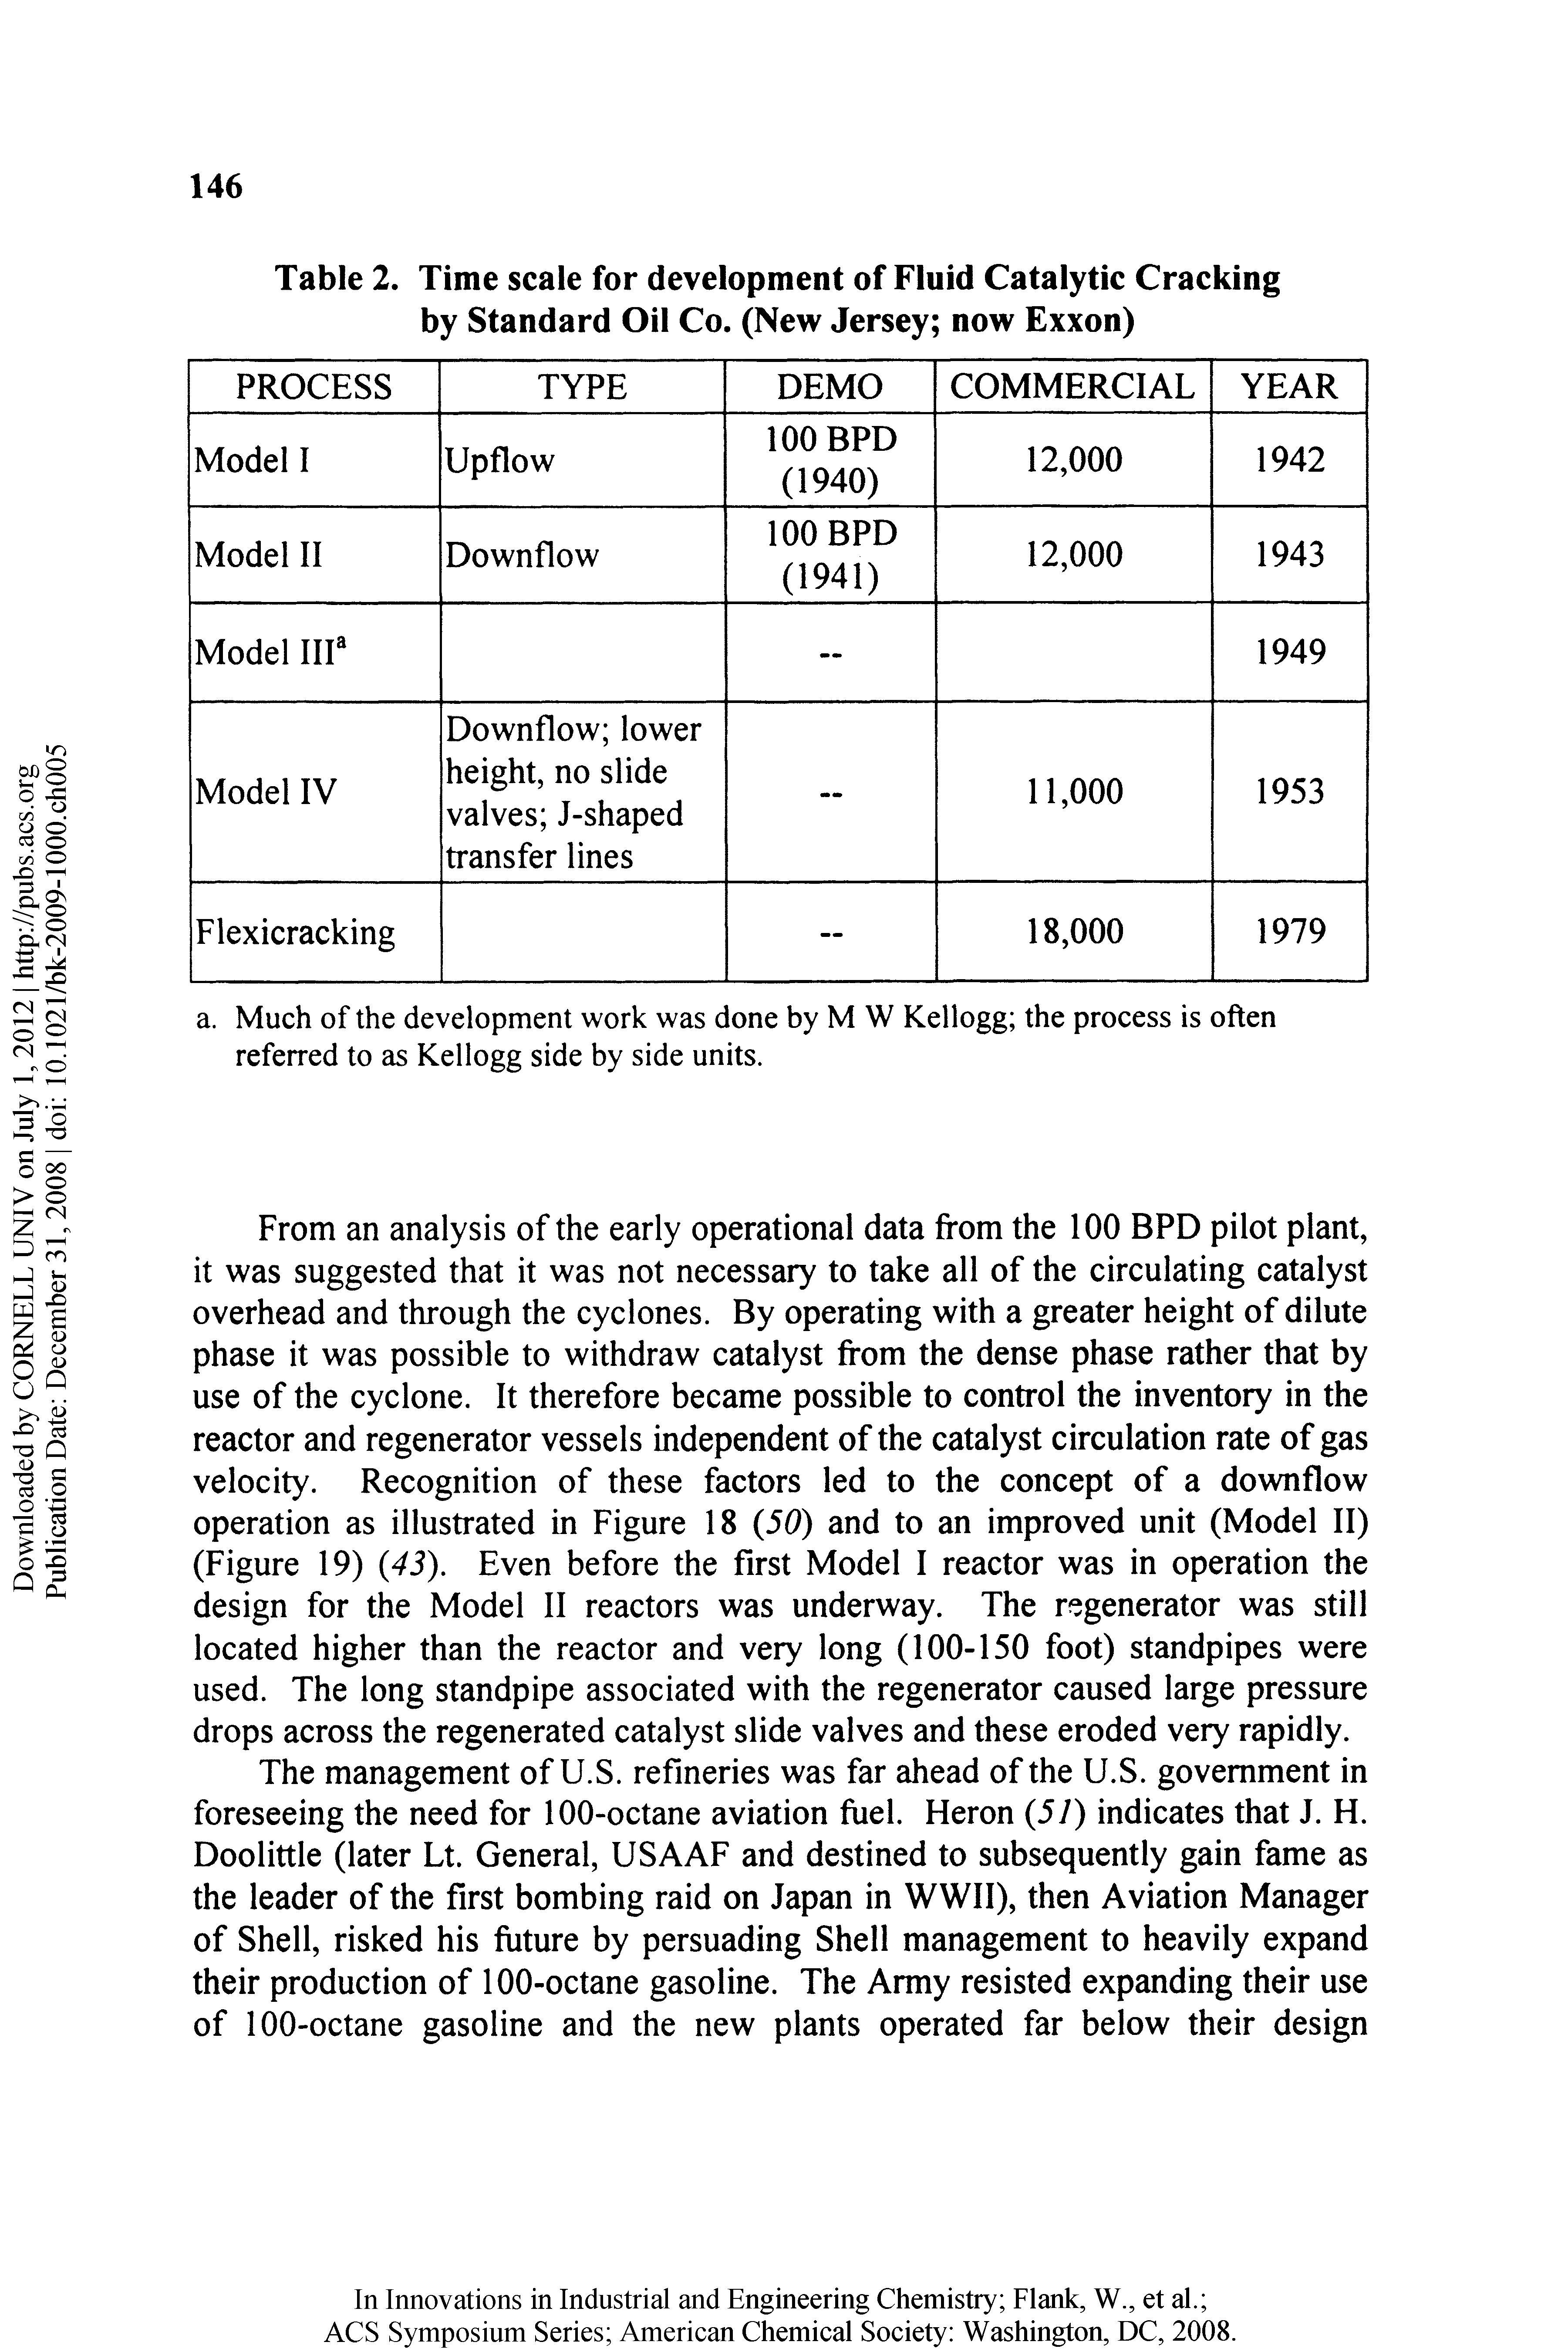 Table 2. Time scale for development of Fluid Catalytic Cracking by Standard Oil Co. (New Jersey now Exxon)...